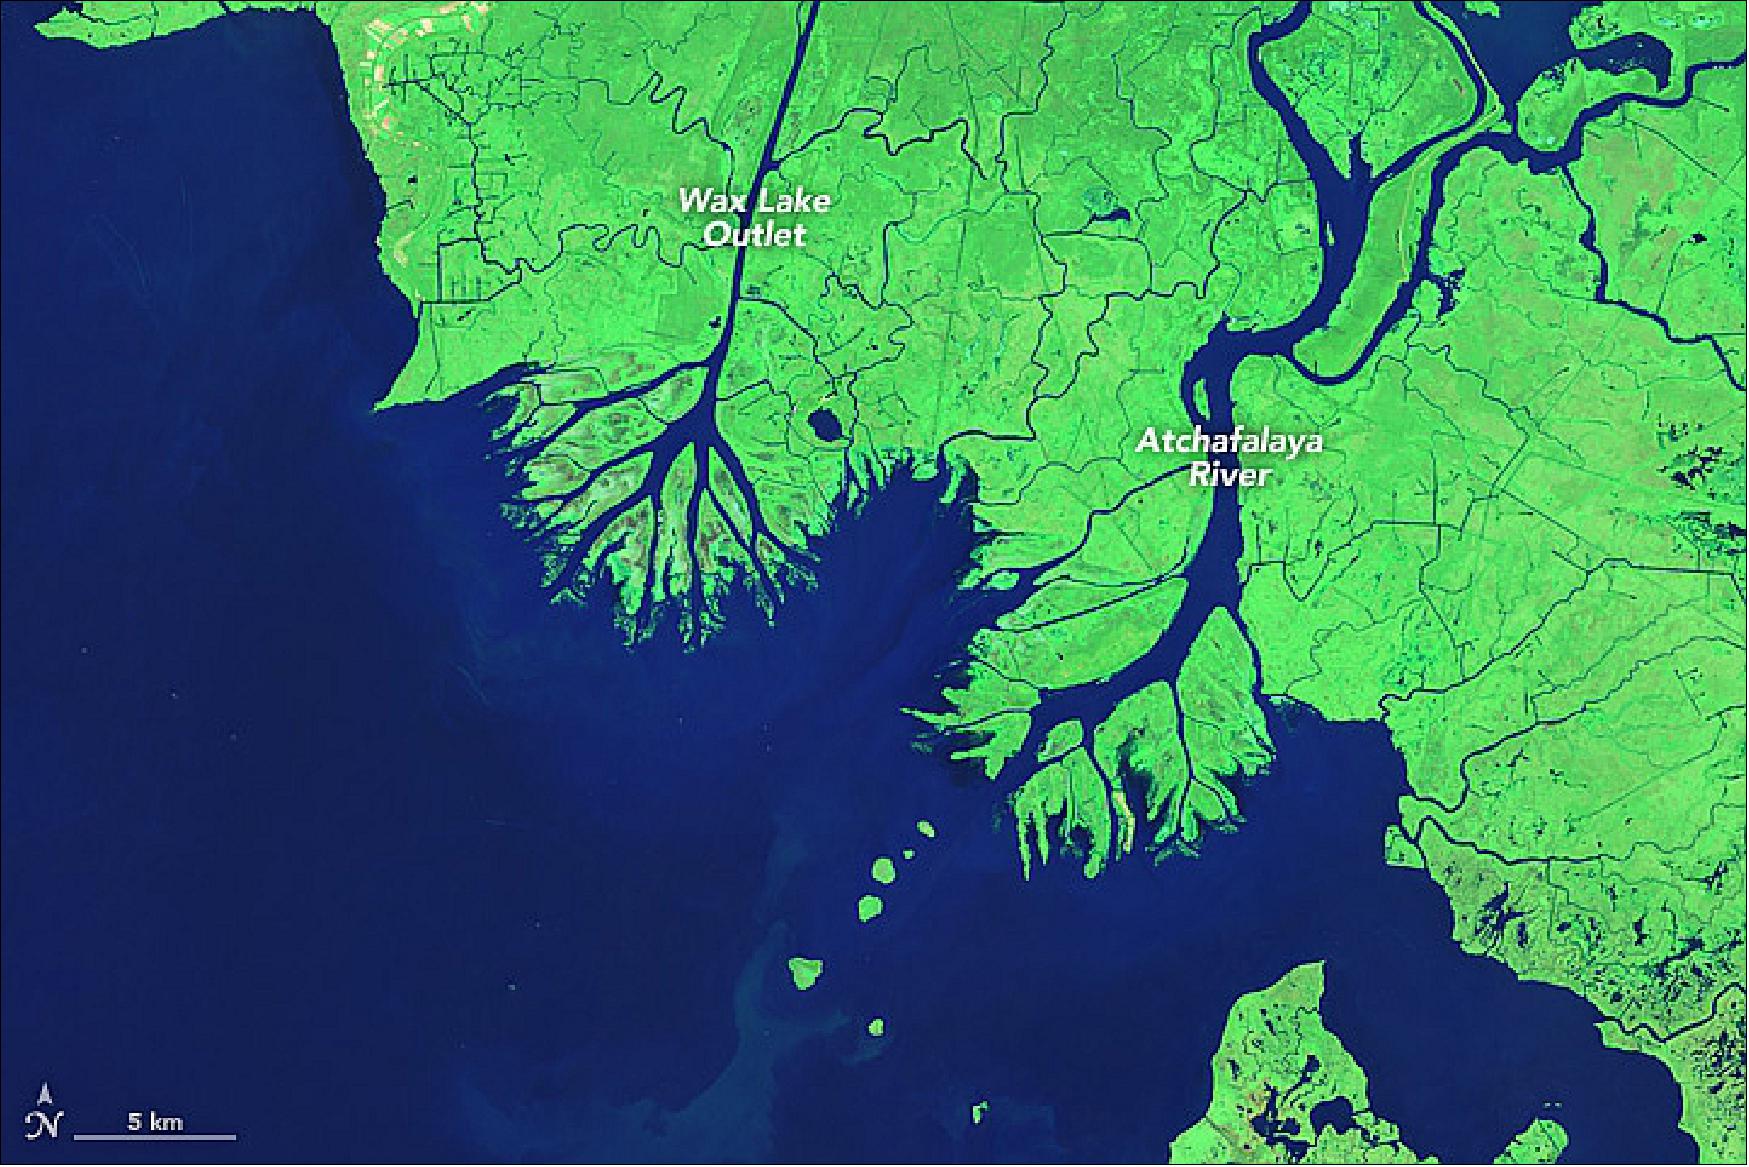 Figure 41: The Atchafalaya River Delta and Wax Lake Outlet, acquired by Landsat-7 on Oct. 12, 2015 (image credit: NASA)